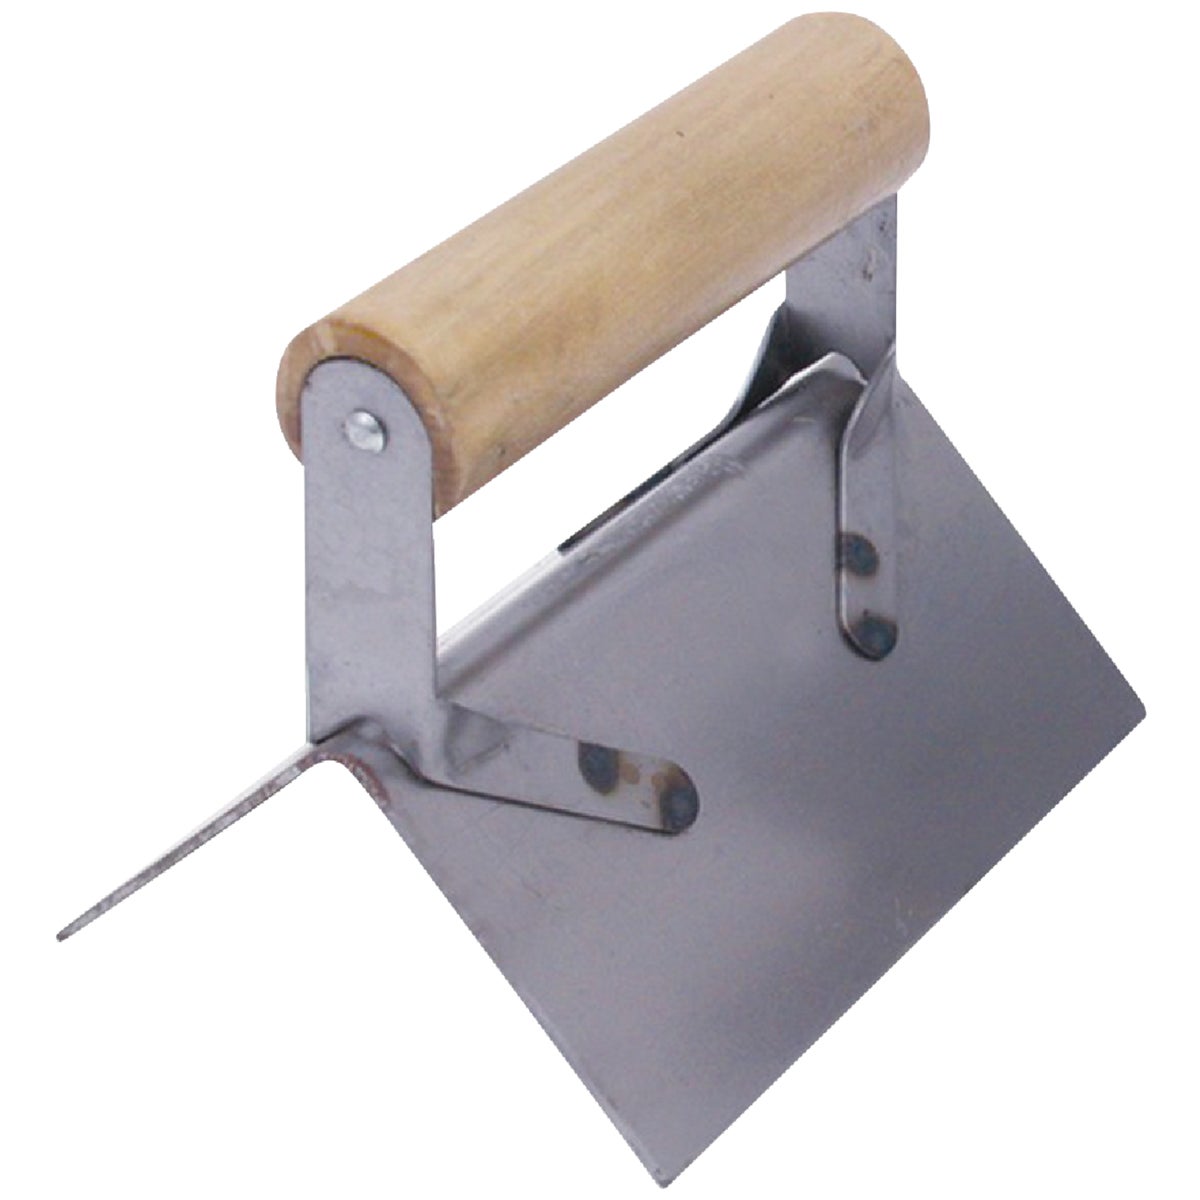 Item 340839, QLT outside corner trowels are ideal for creating sharp corners and edges 